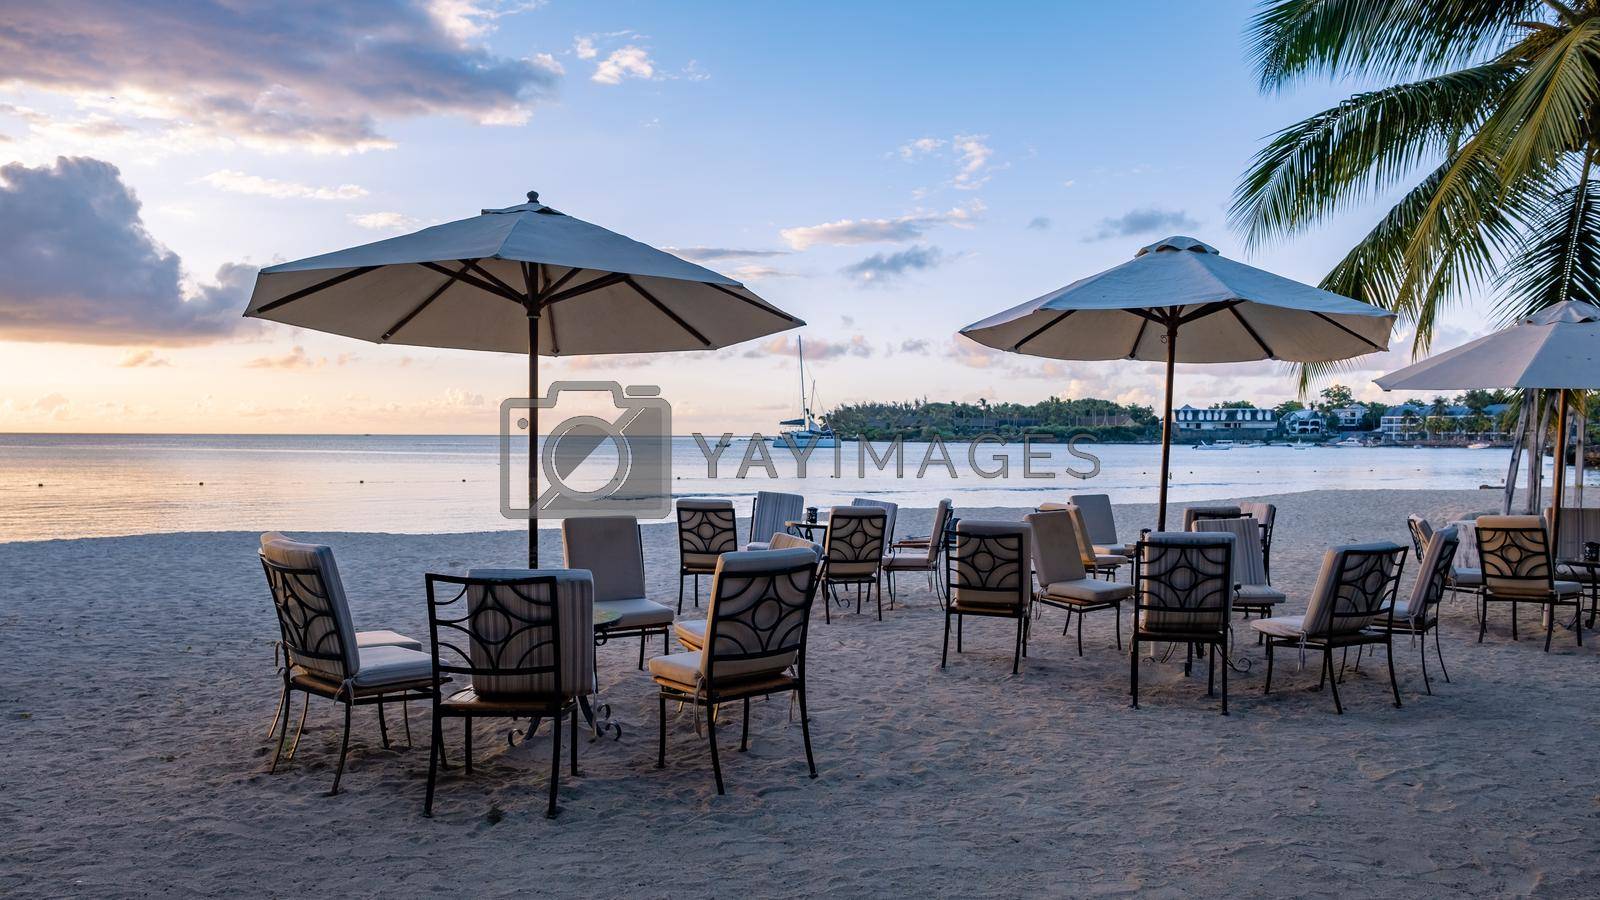 Royalty free image of luxury travel, romantic beach getaway holidays for honeymoon couple, tropical vacation in luxurious hotel, beach chairs on the beach by fokkebok